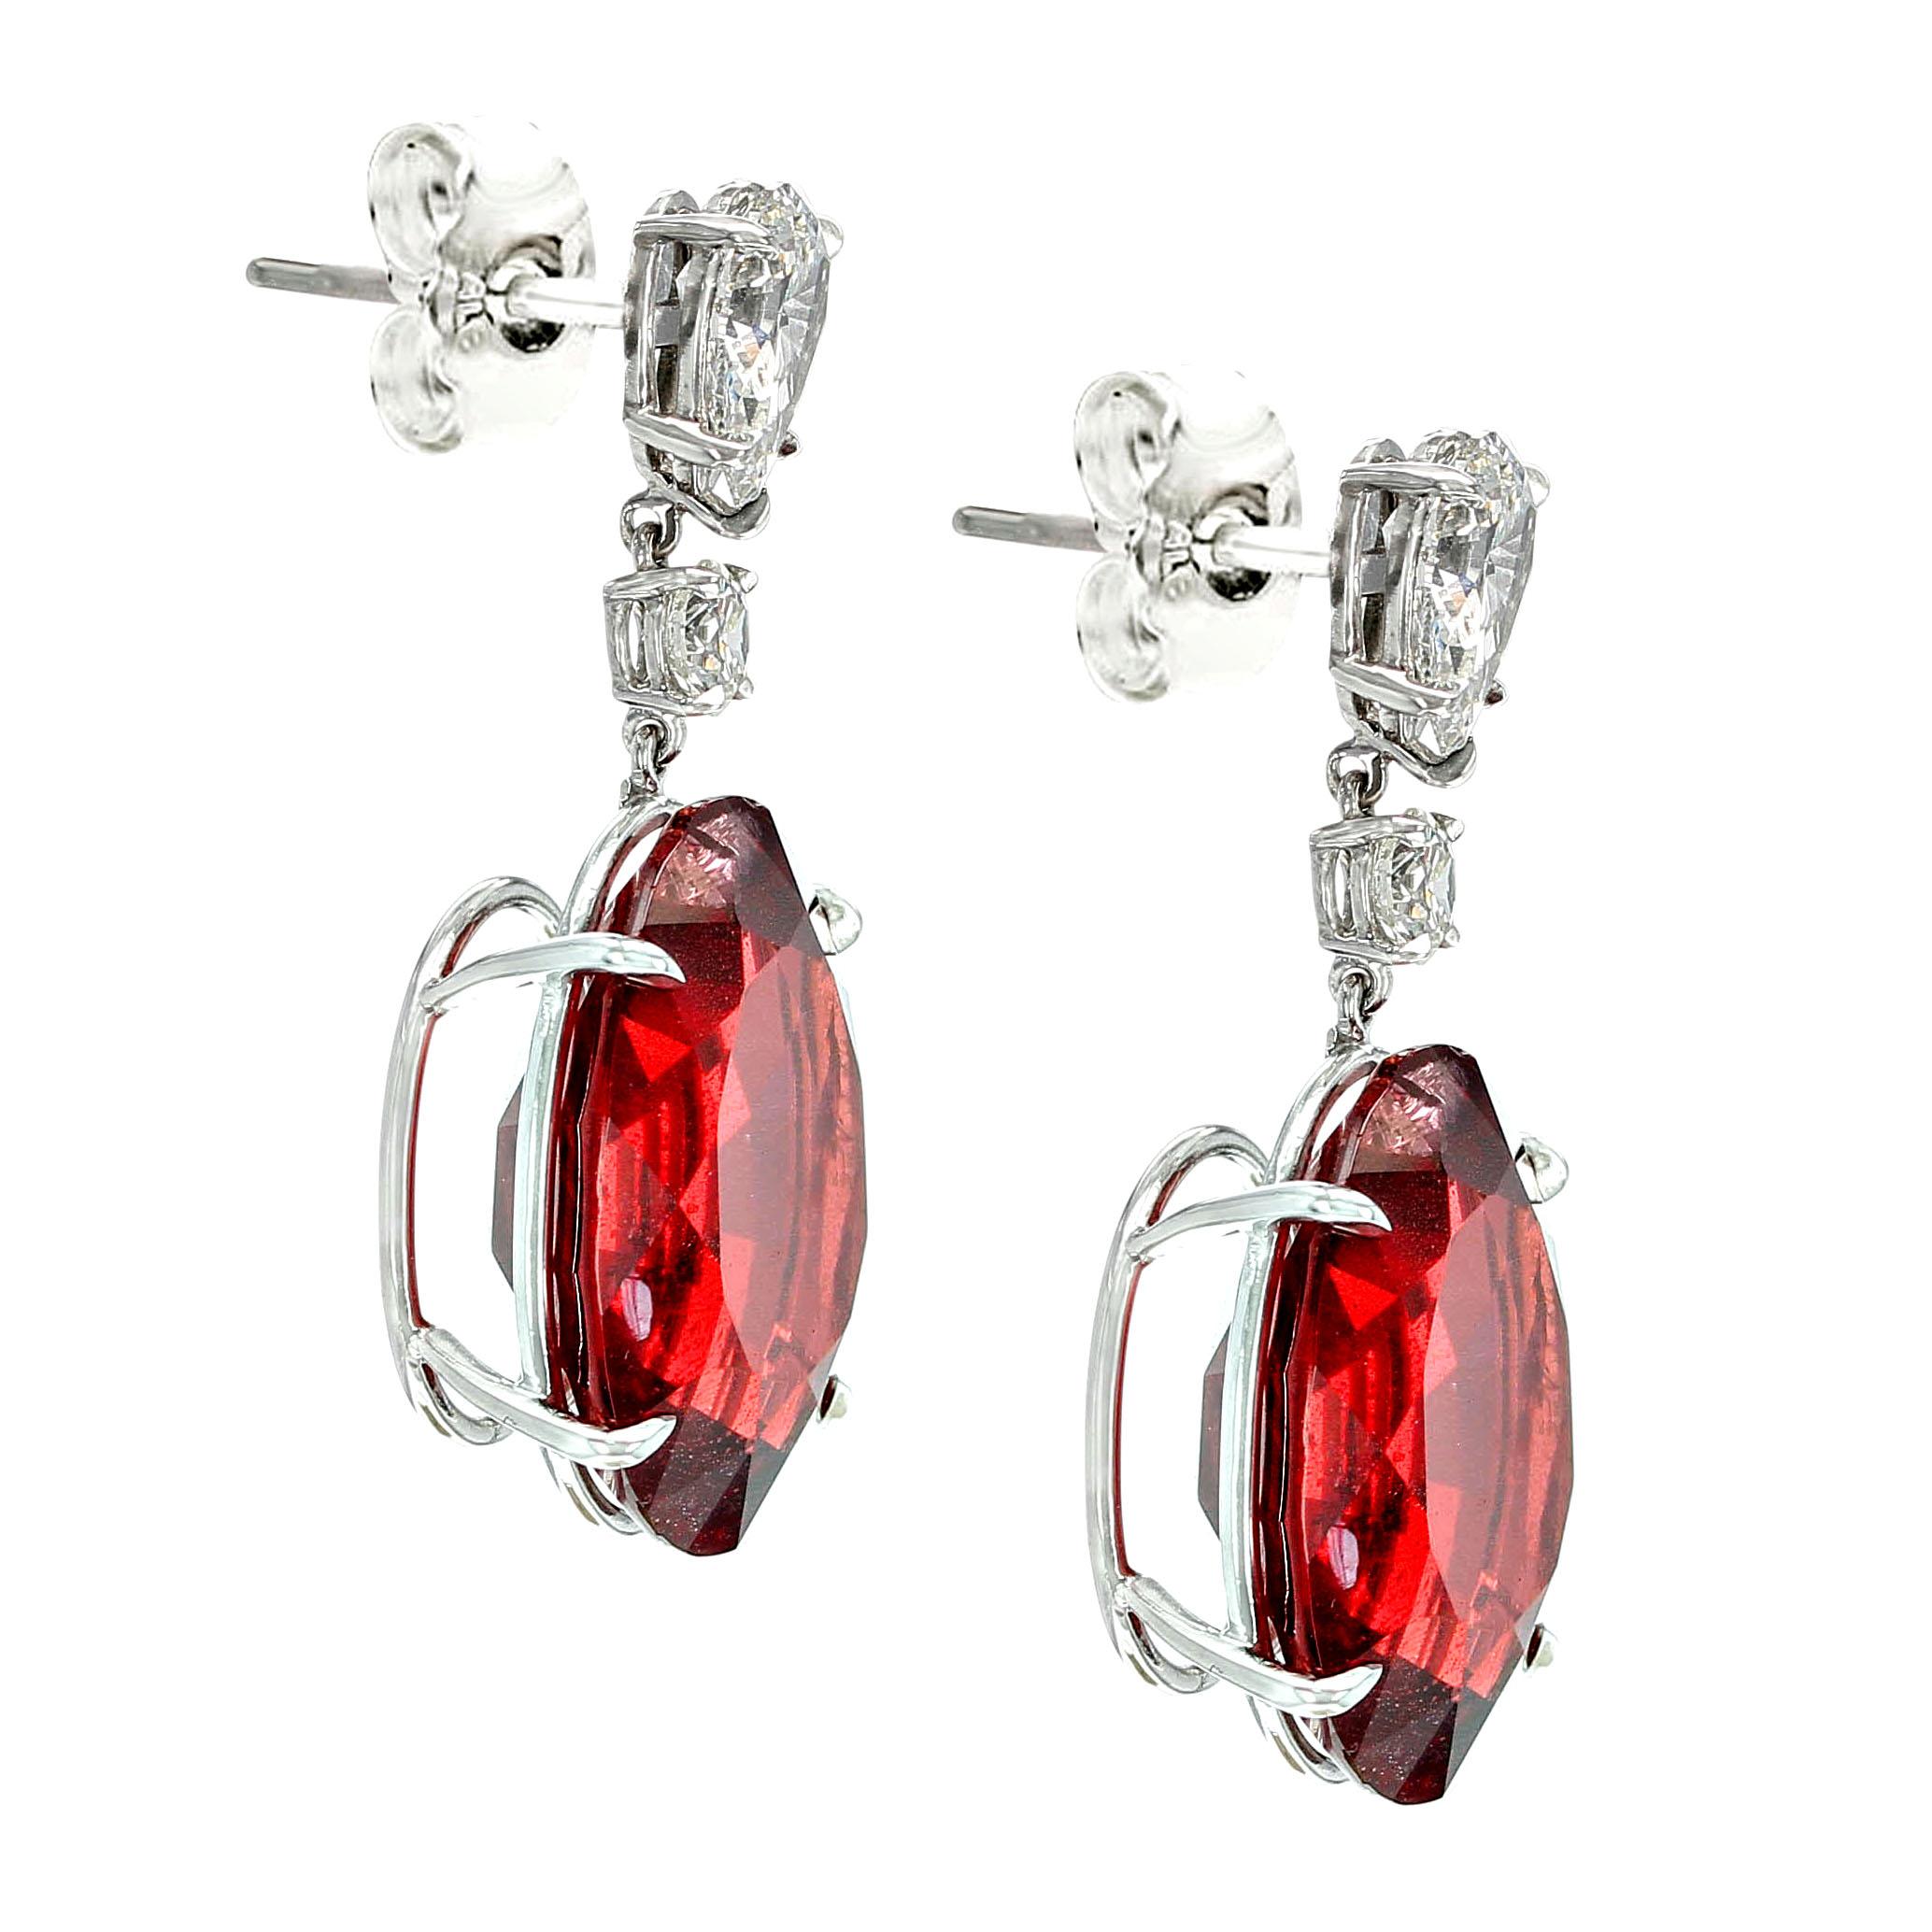 An impressive and rare pair of earrings each set with a large modified oval shape spinel from Burma (Myanmar) hanging from a pear shape and round brilliant-cut diamond setting. The total weight of the two spinels is in excess of thirty-eight carats,